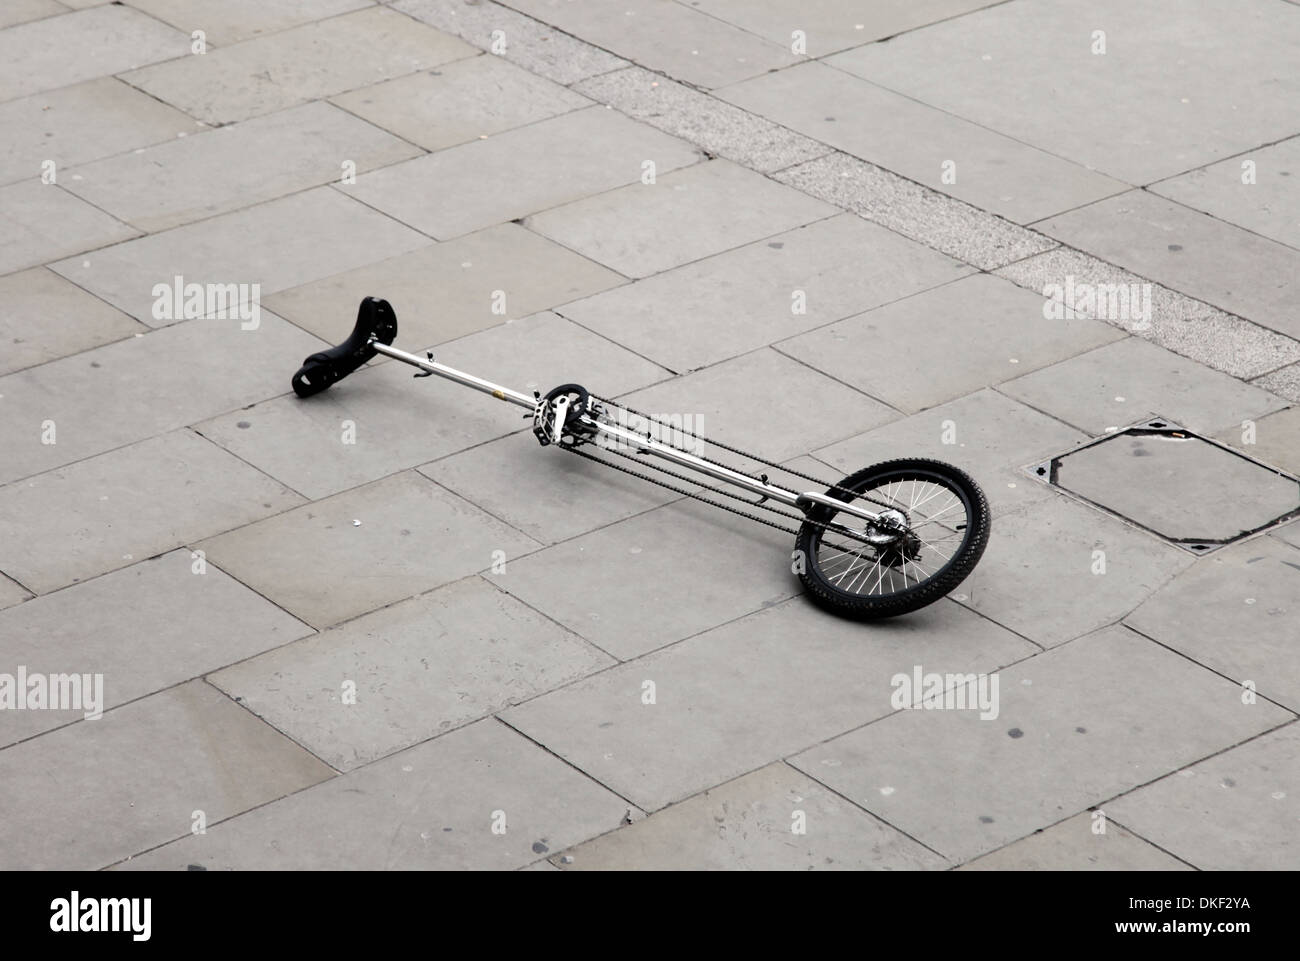 It's a photo of a monocycle or unicycle that is on the ground or floor on tiles in the street outdoor Stock Photo